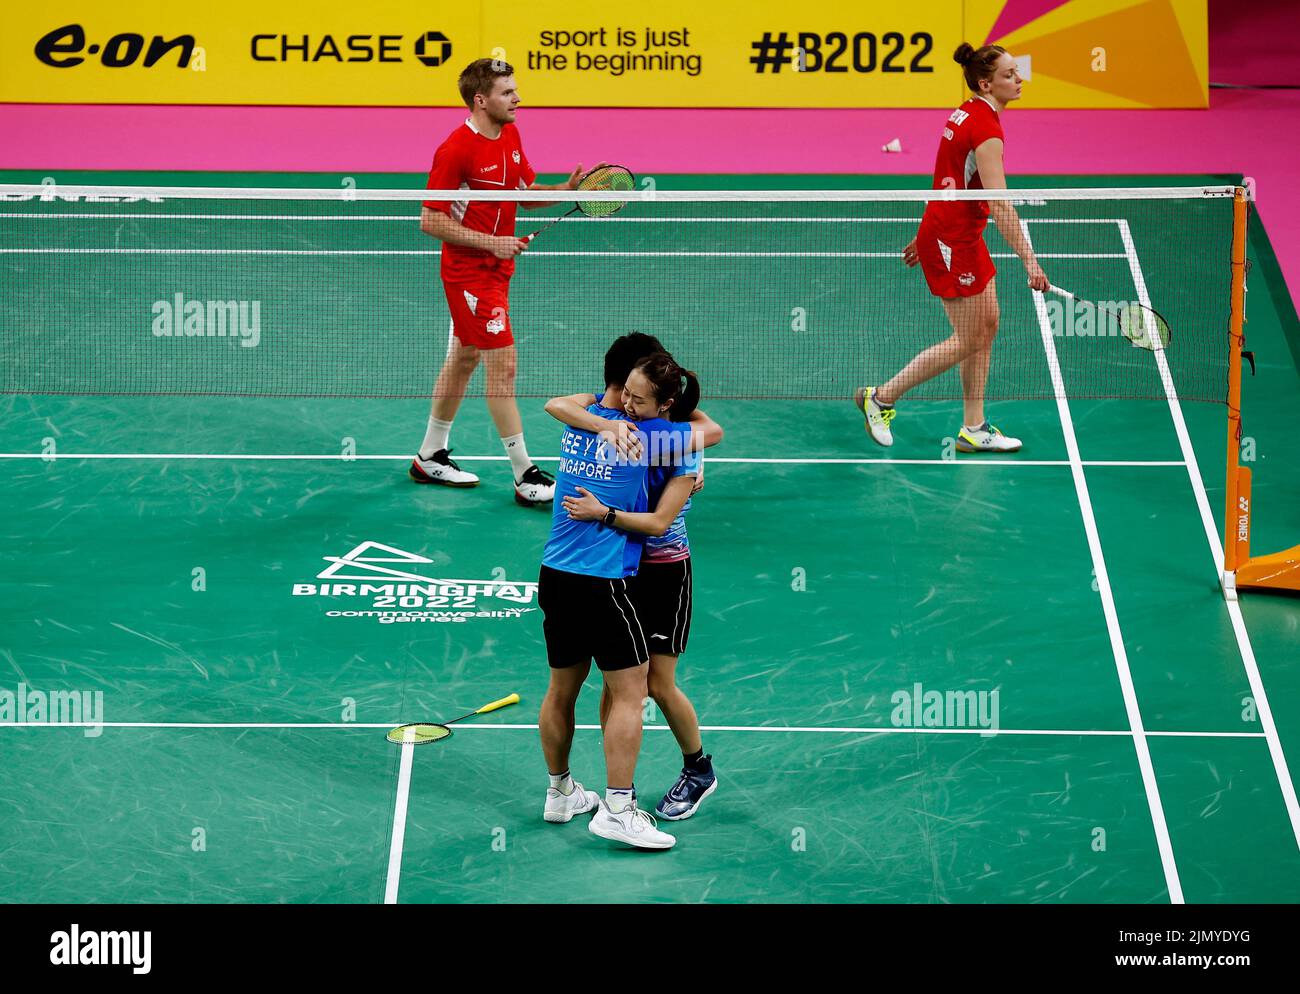 Commonwealth Games - Badminton - Mixed Doubles - Gold Medal Match -The NEC Hall 5, Birmingham, Britain - August 8, 2022 Singapore's Yong Kai Terry Hee and Jessica Wei Han Tan celebrate winning gold against England's Marcus Ellis and Lauren Smith REUTERS/Jason Cairnduff Stock Photo